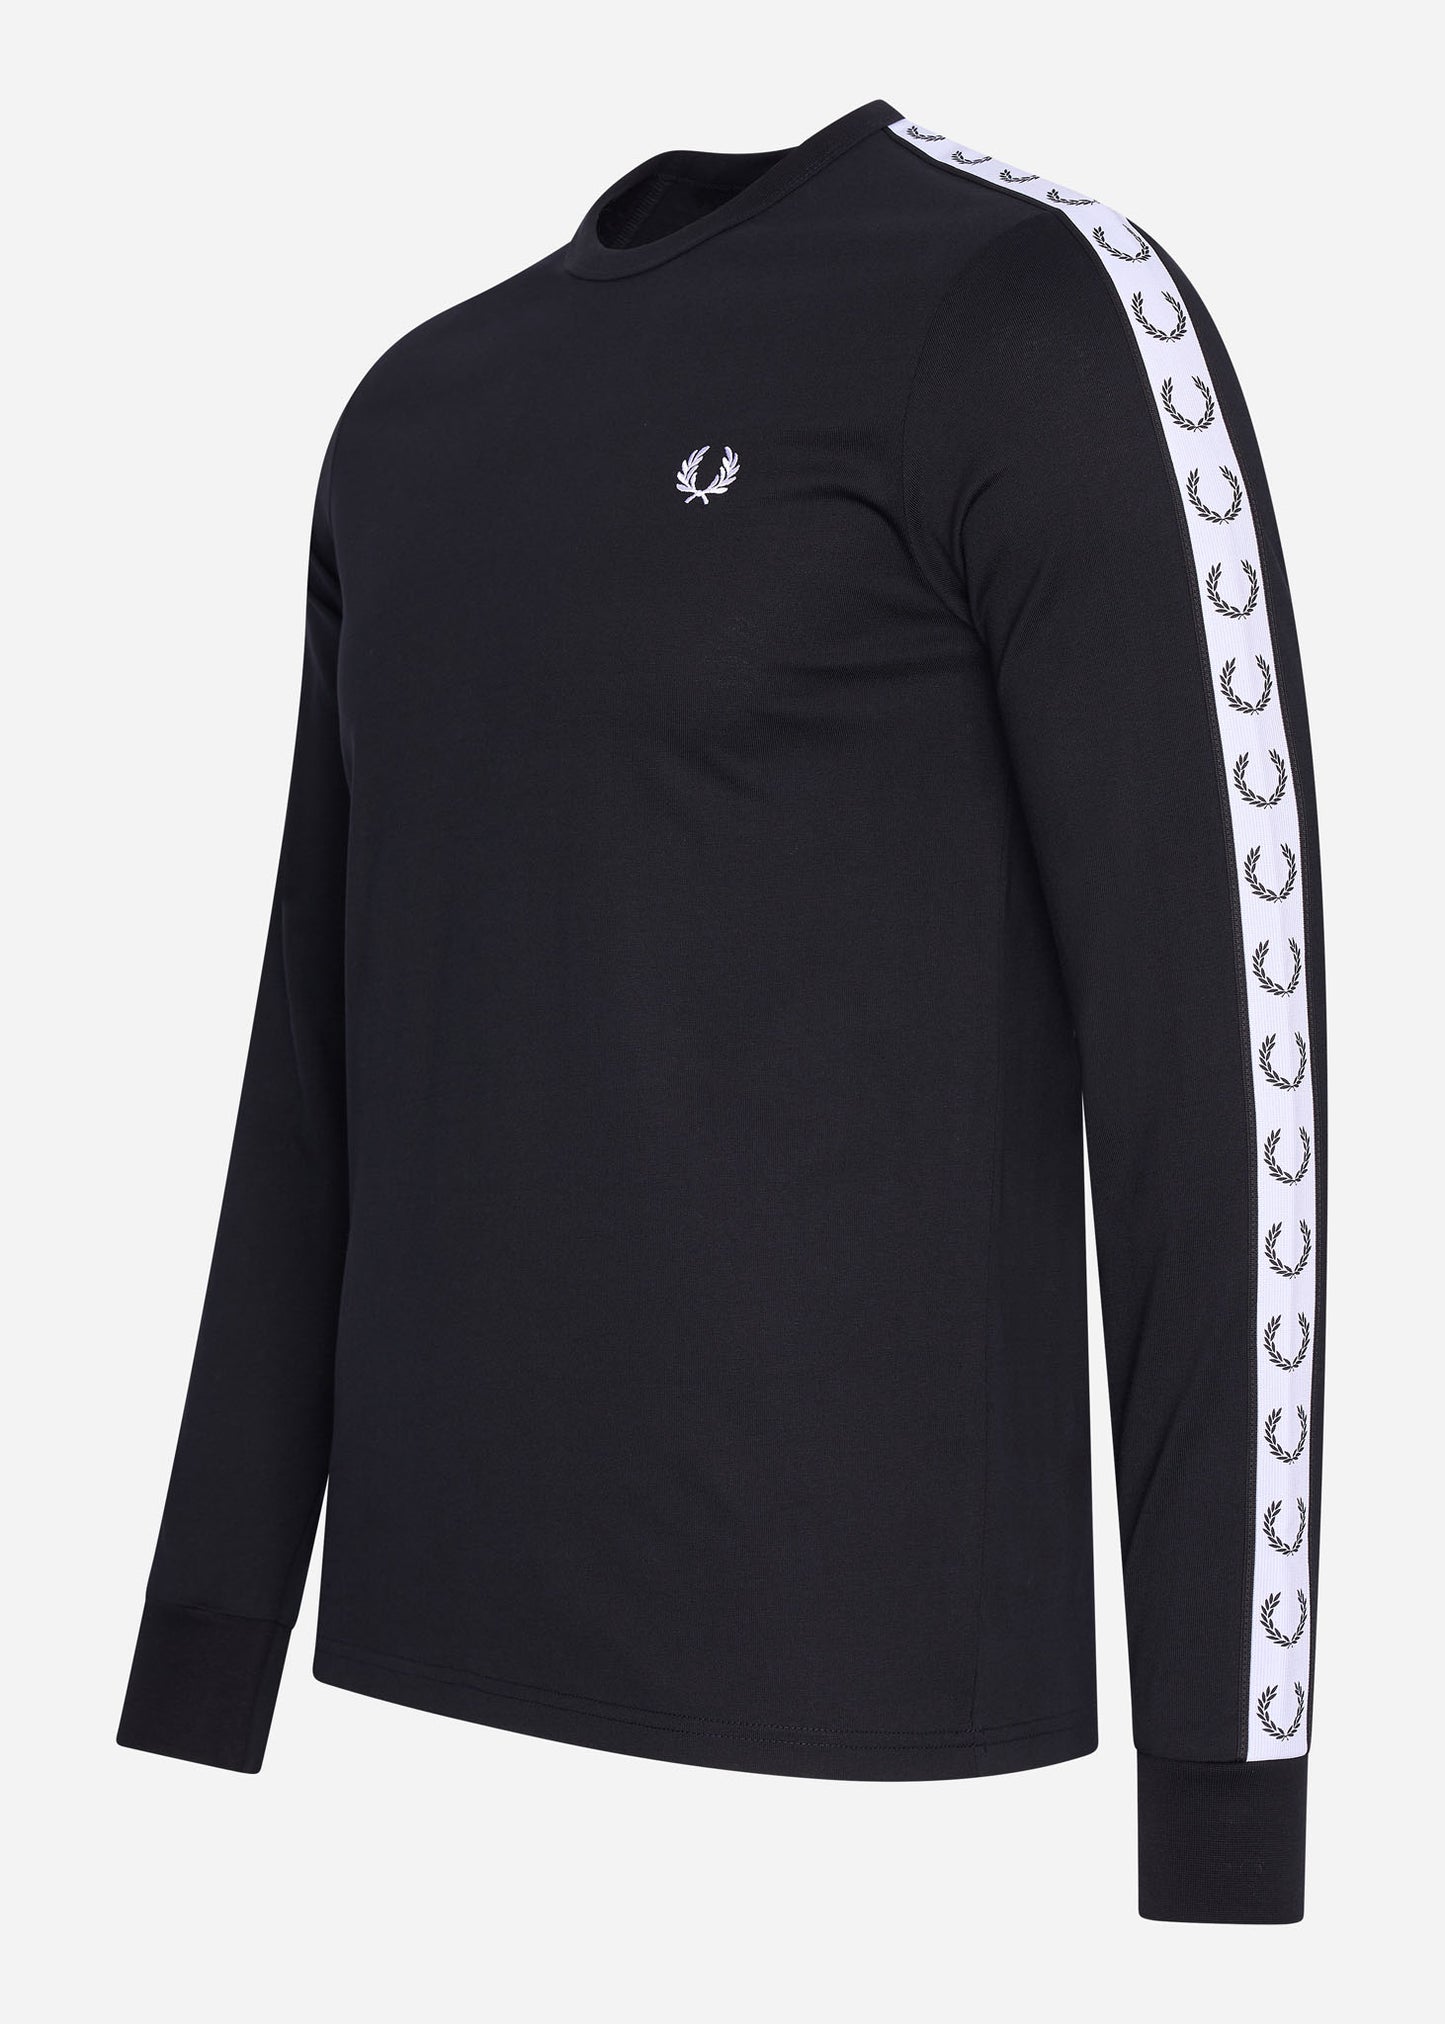 fred perry taped longsleeve t-shirt